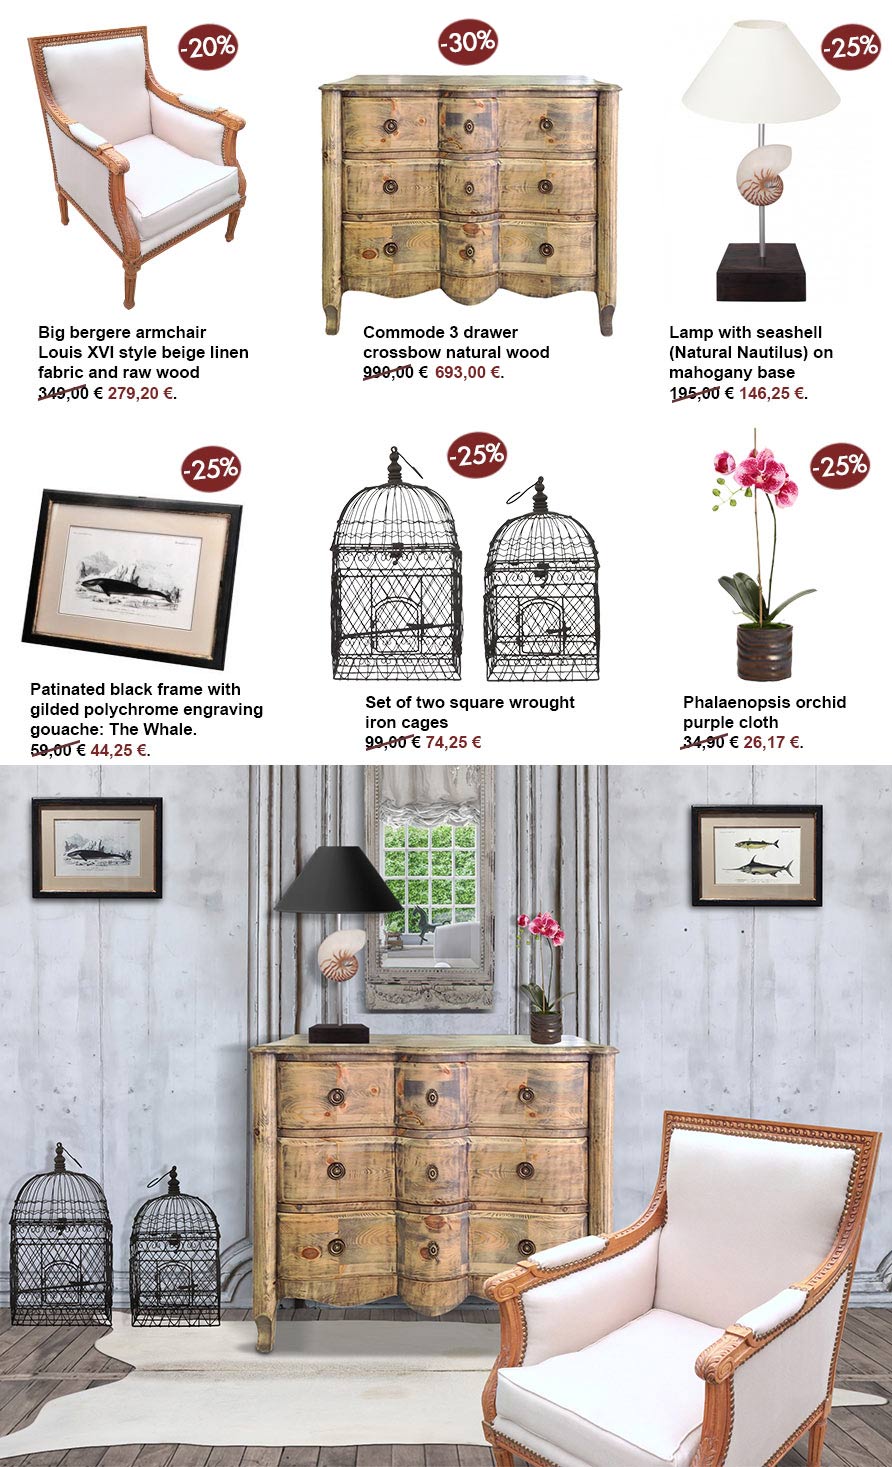 low prices on furniture and chic country decorative items